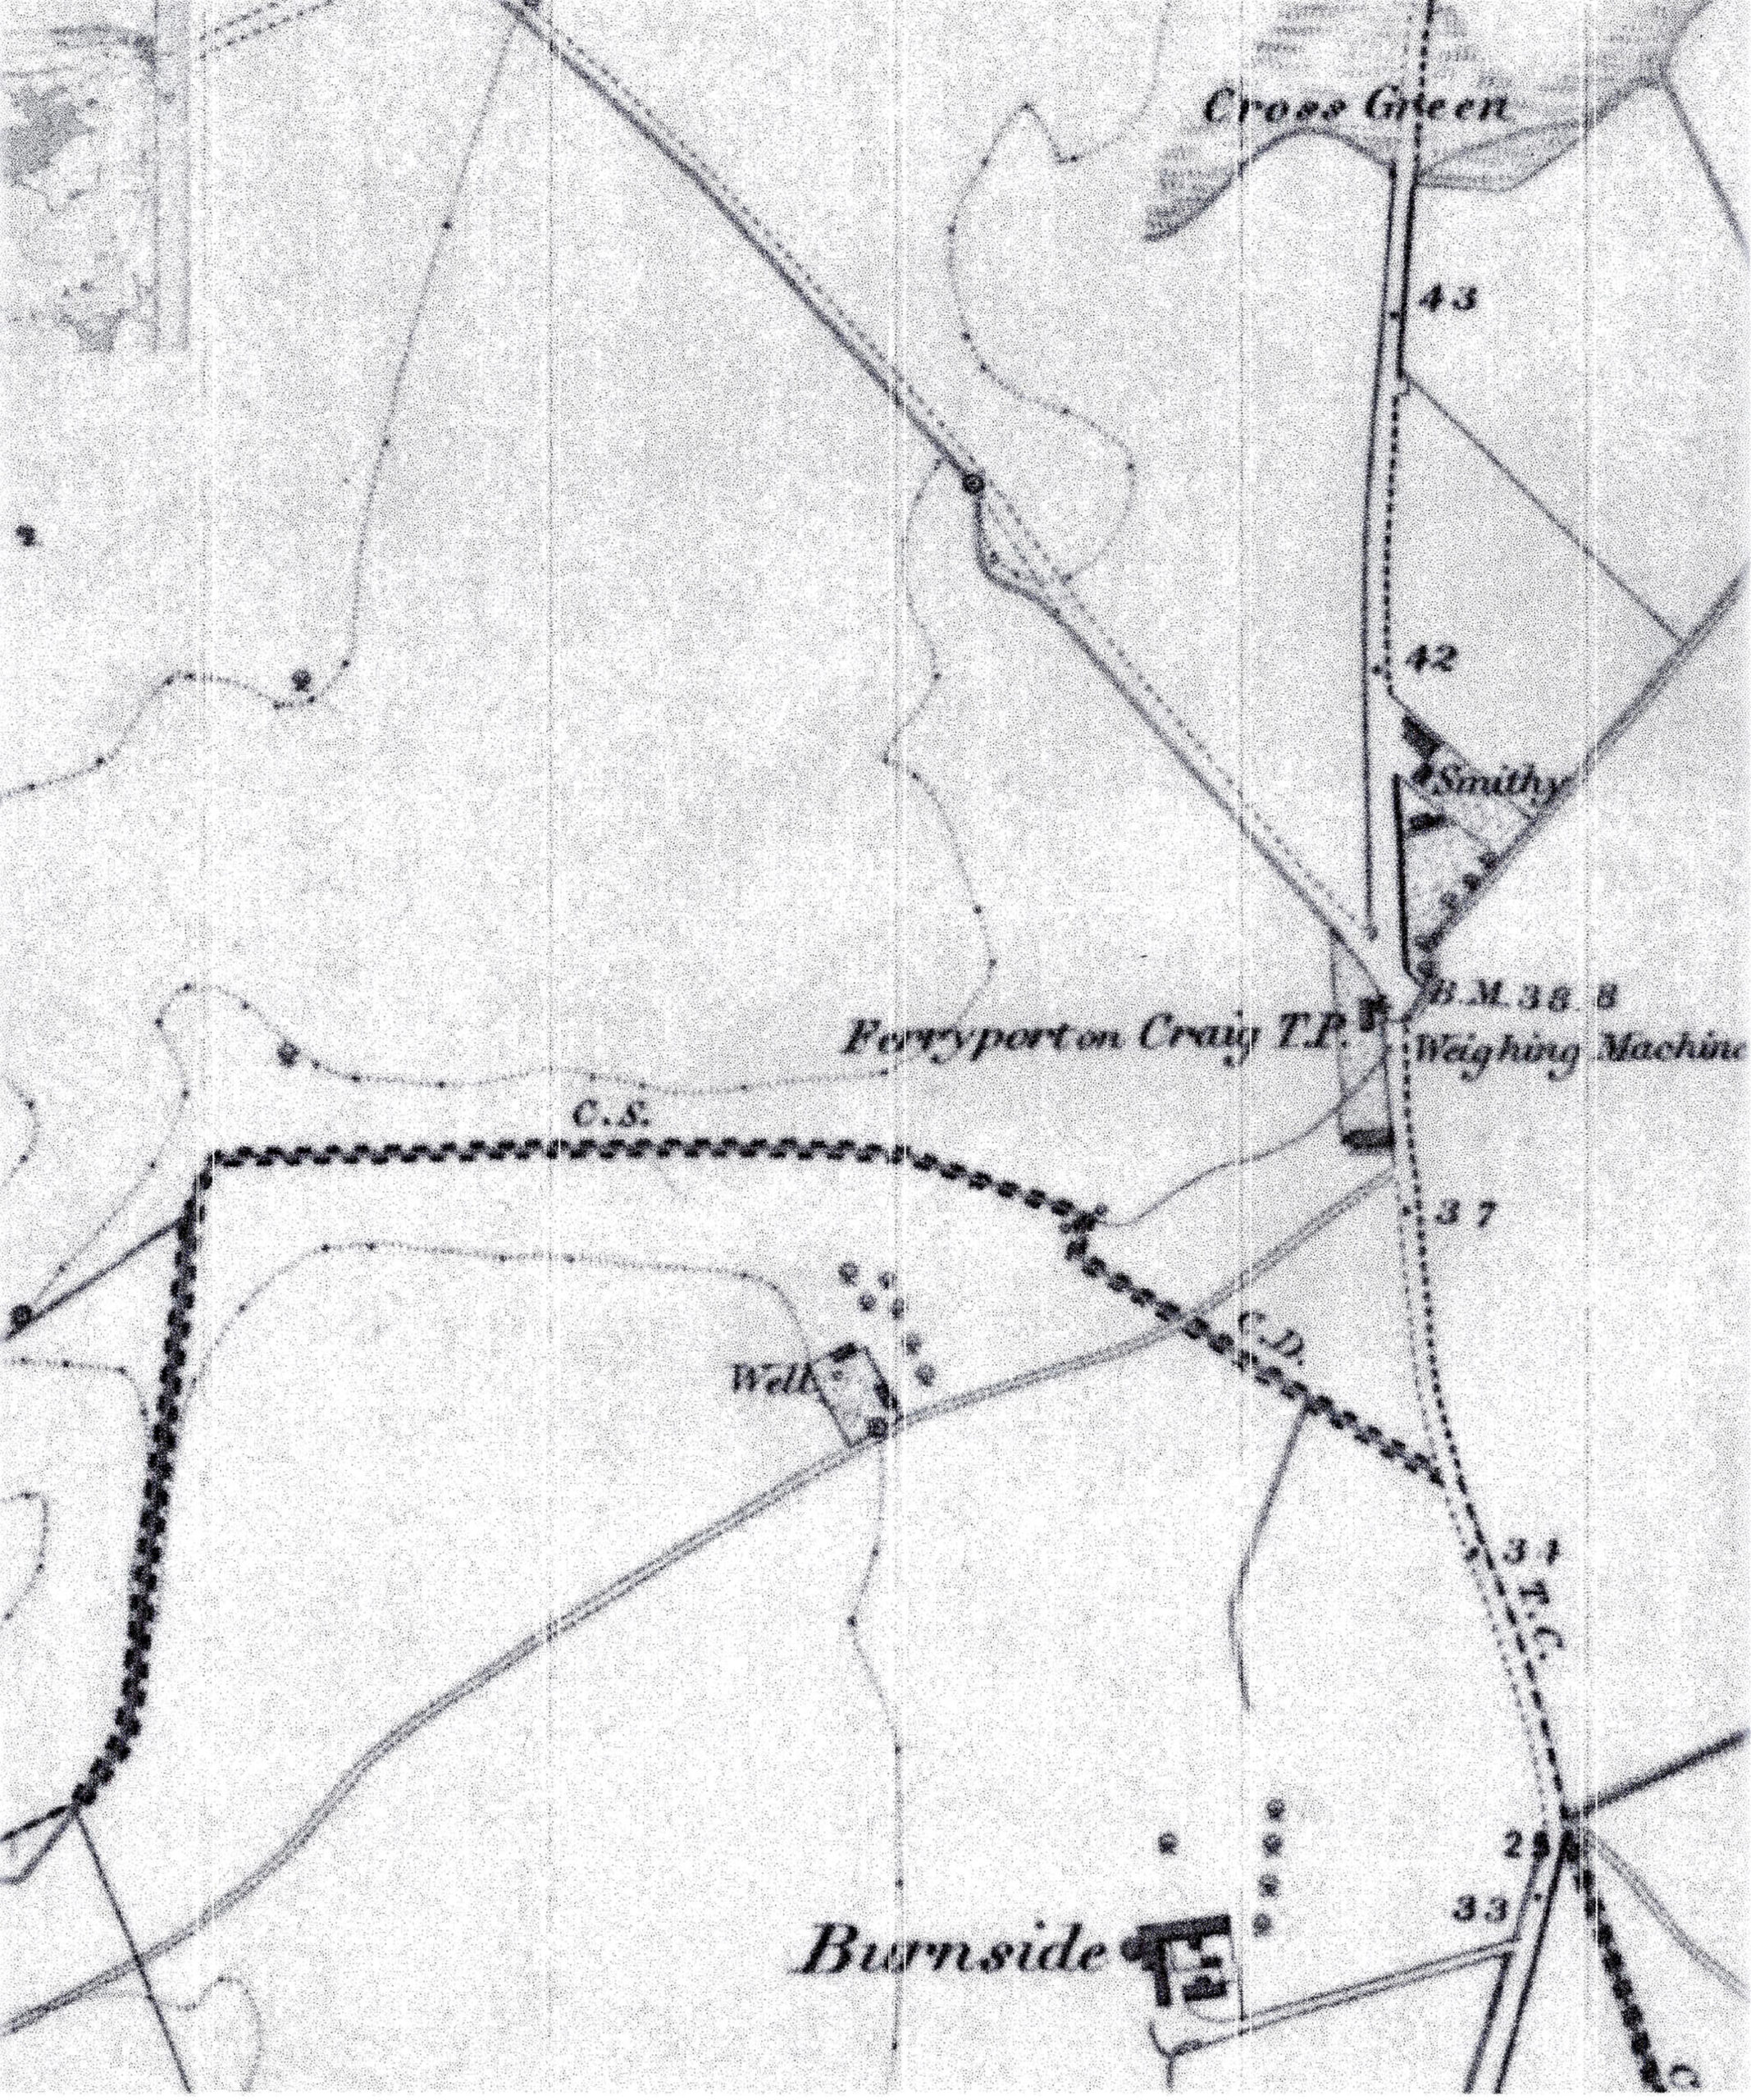 Tayport Heritage Trail - Board 13 - 1855 OS map showing Toll House with weighbridge